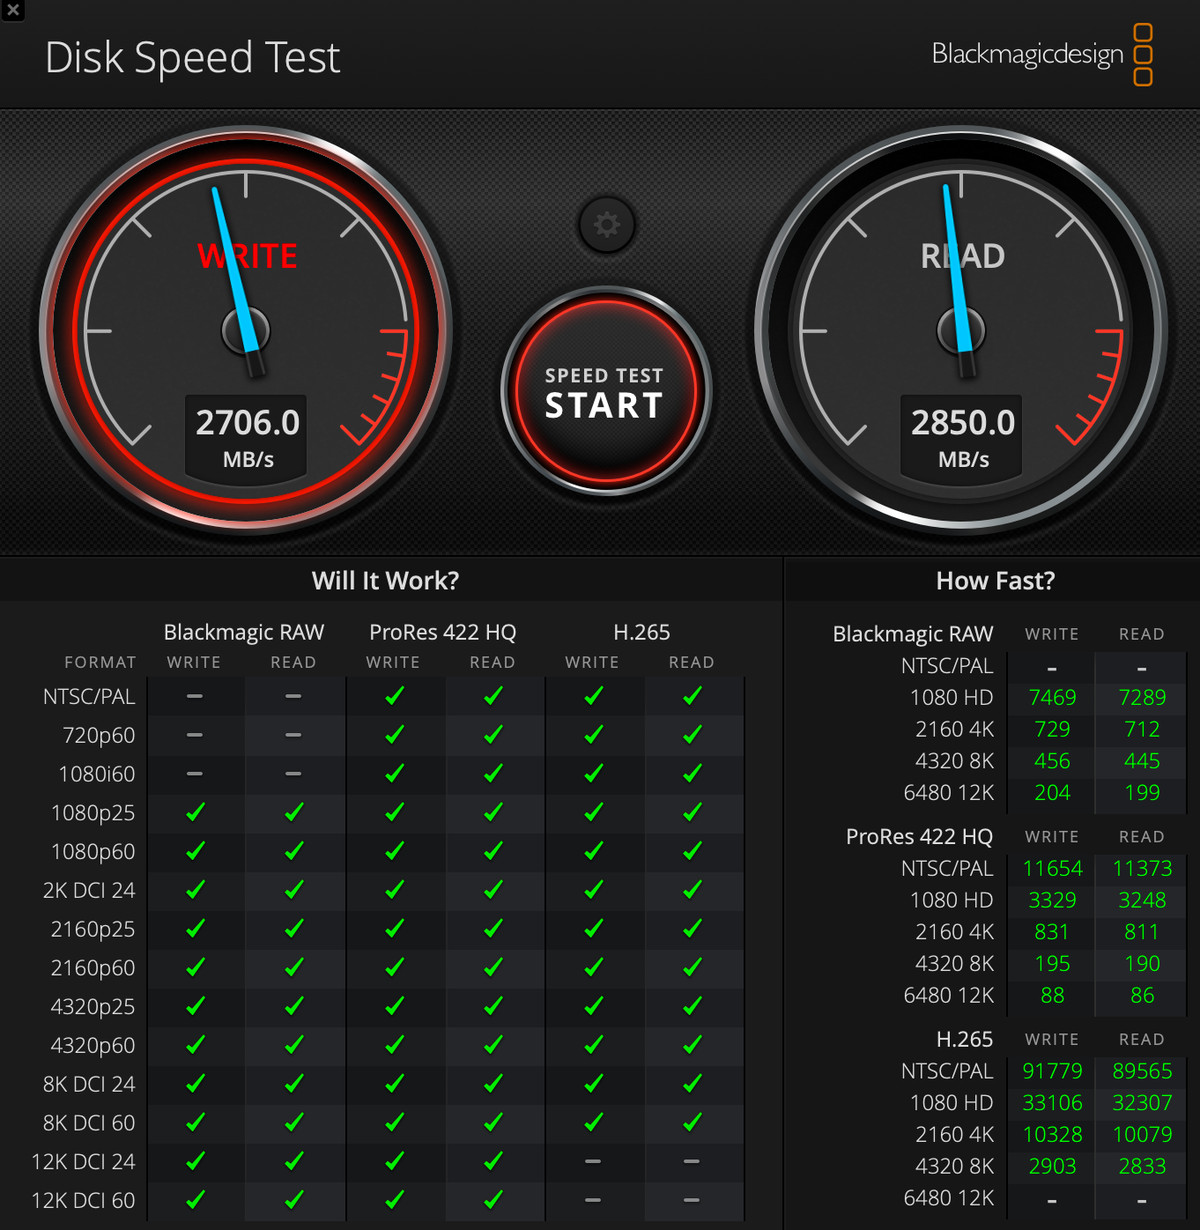 A screenshot of the Blackmagic Disk Speed ​​Test indicating scores of 2706 for writing and 2850 for reading.